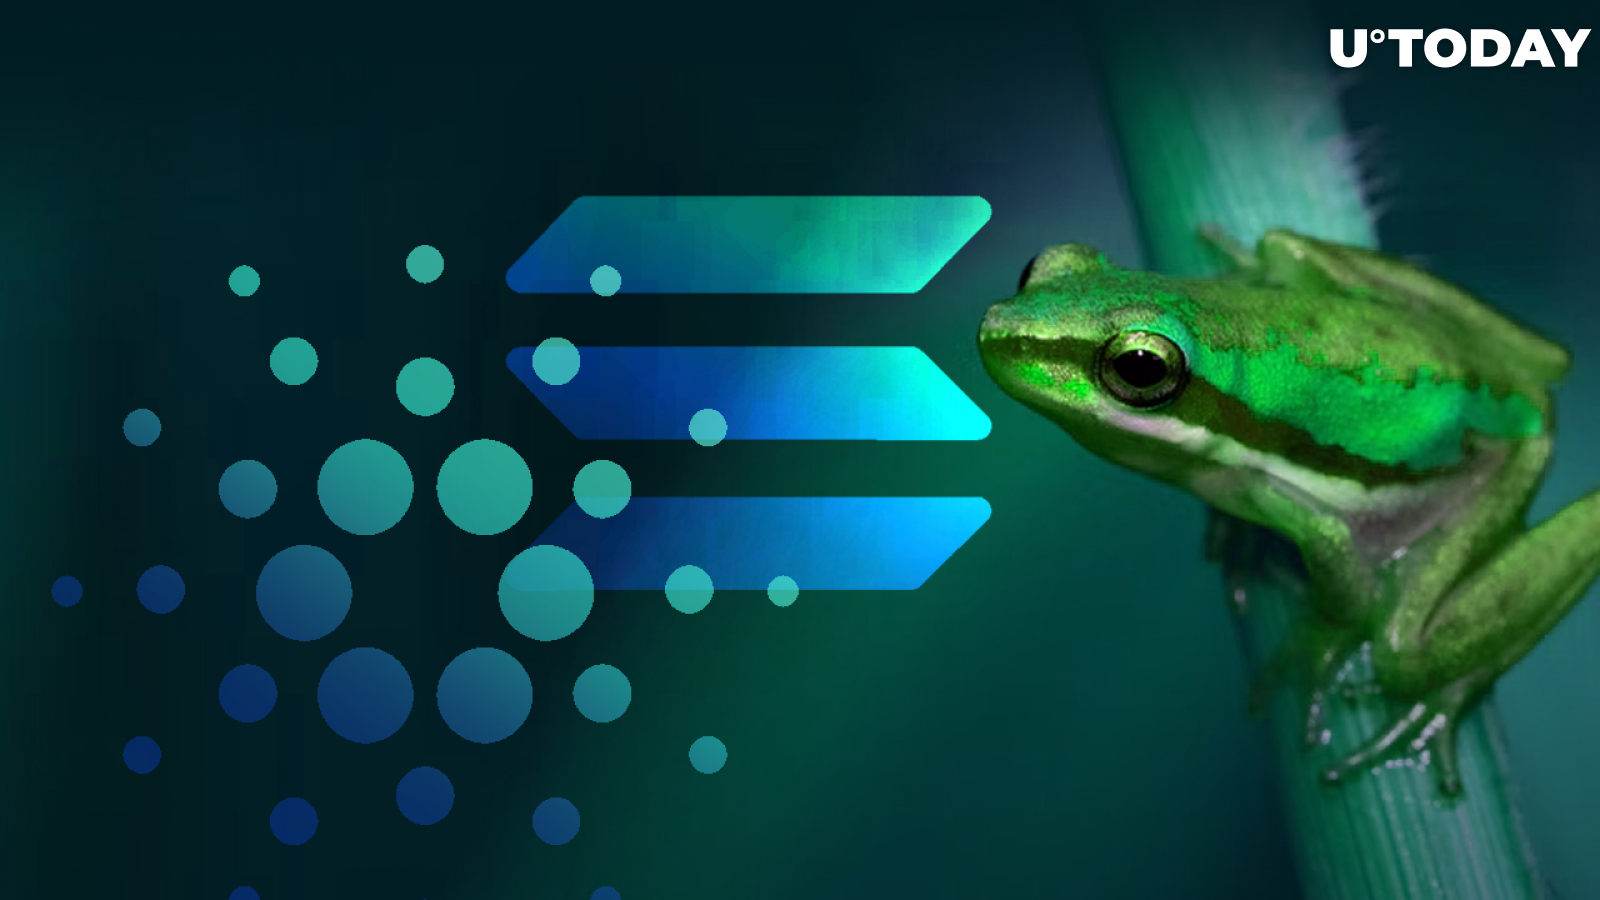 Cardano Founder Strikes Back at Solana Team for Advising Him to Kiss Frogs When Coding